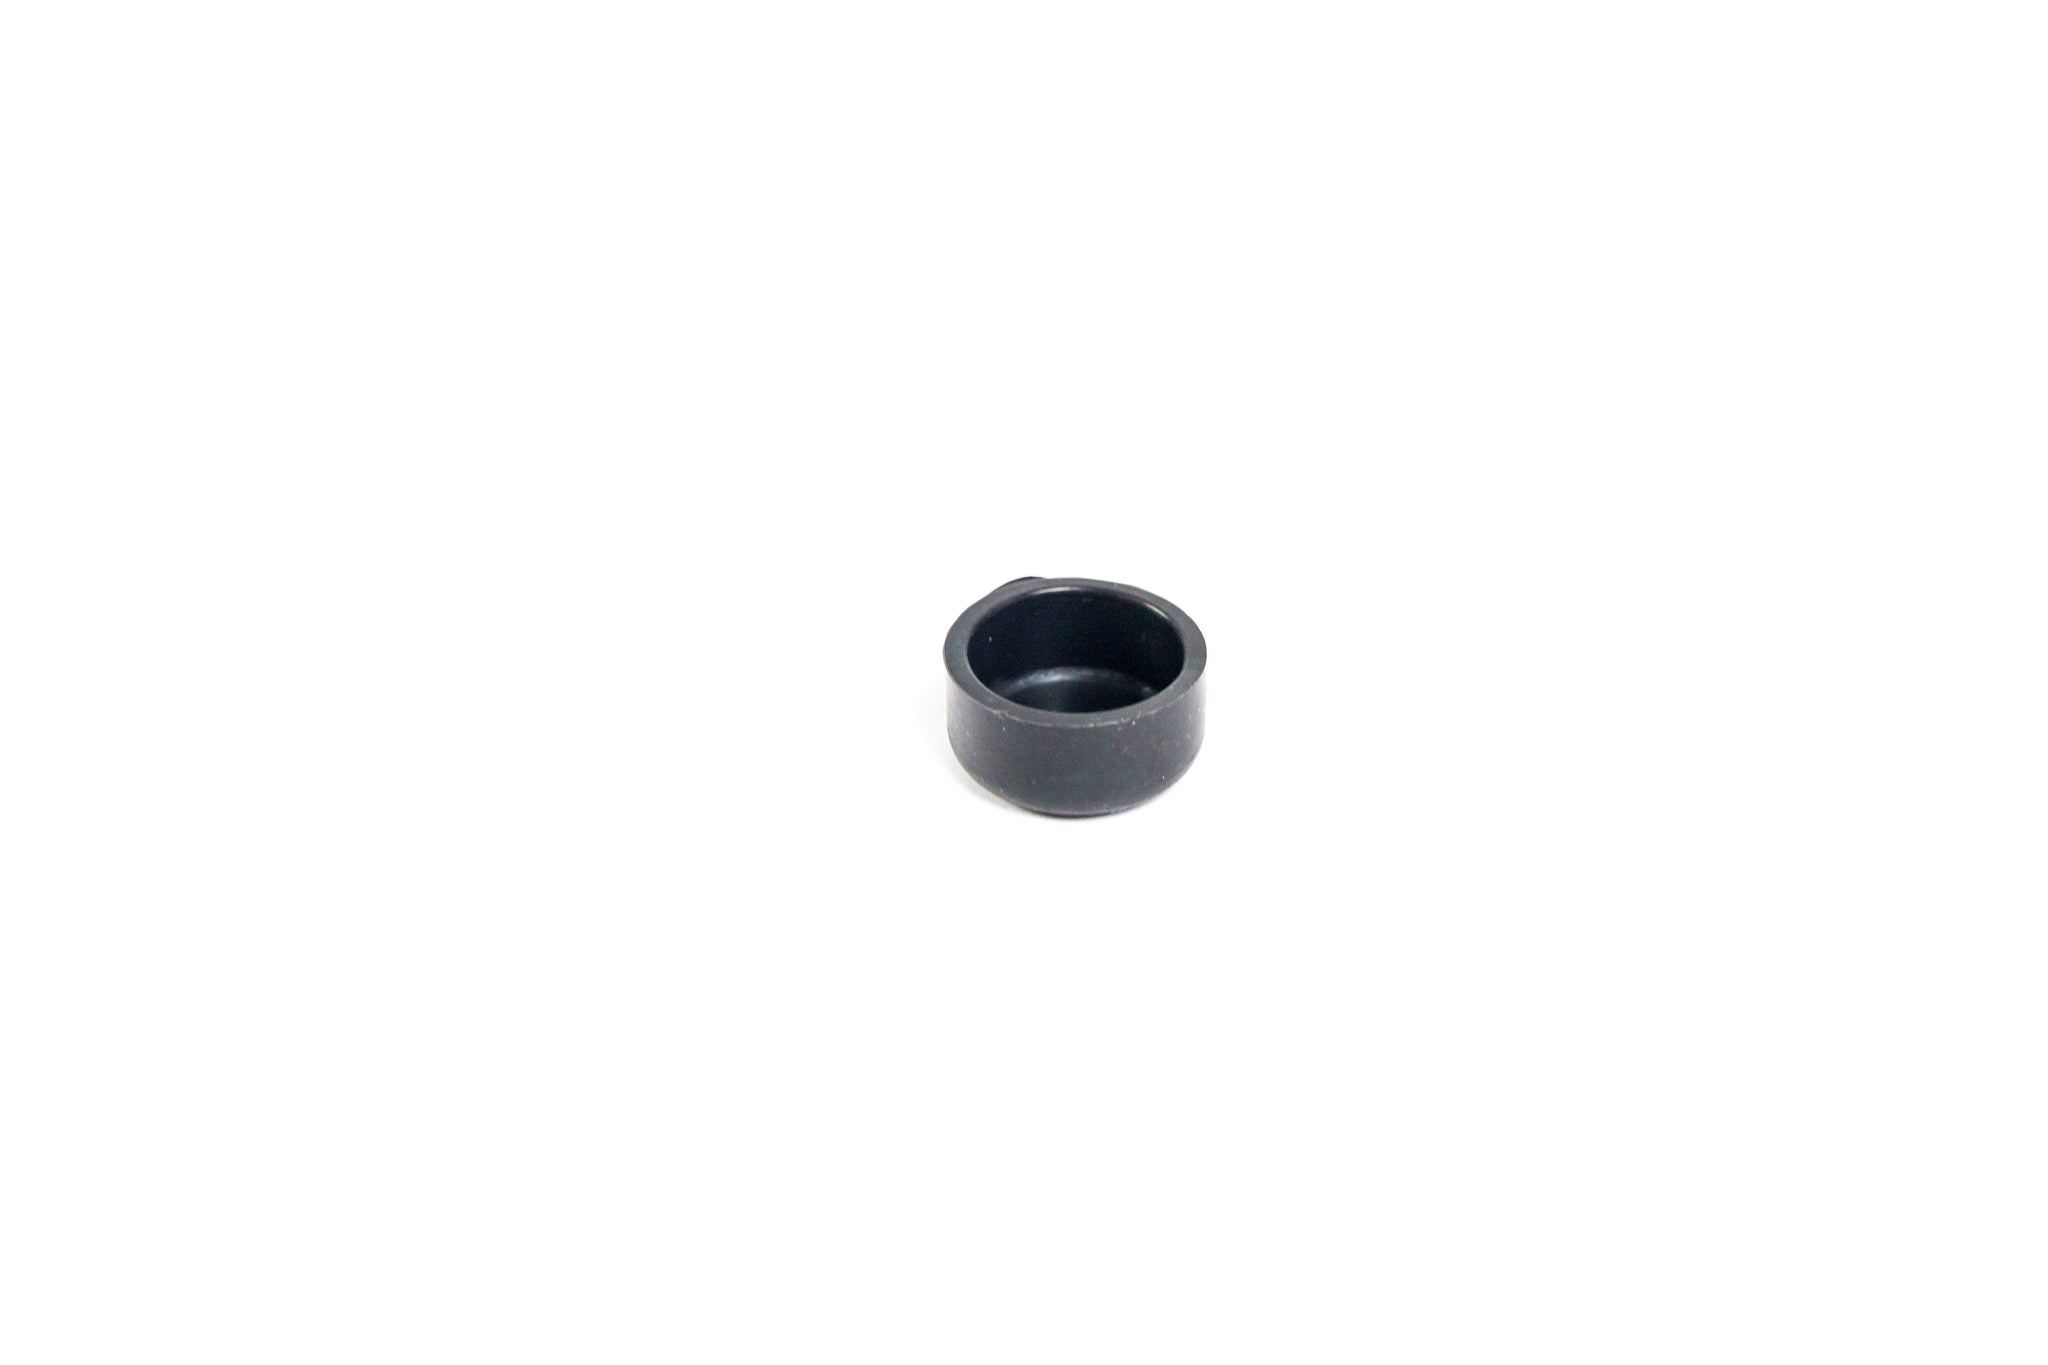 Silicone end cap for the removable check valve